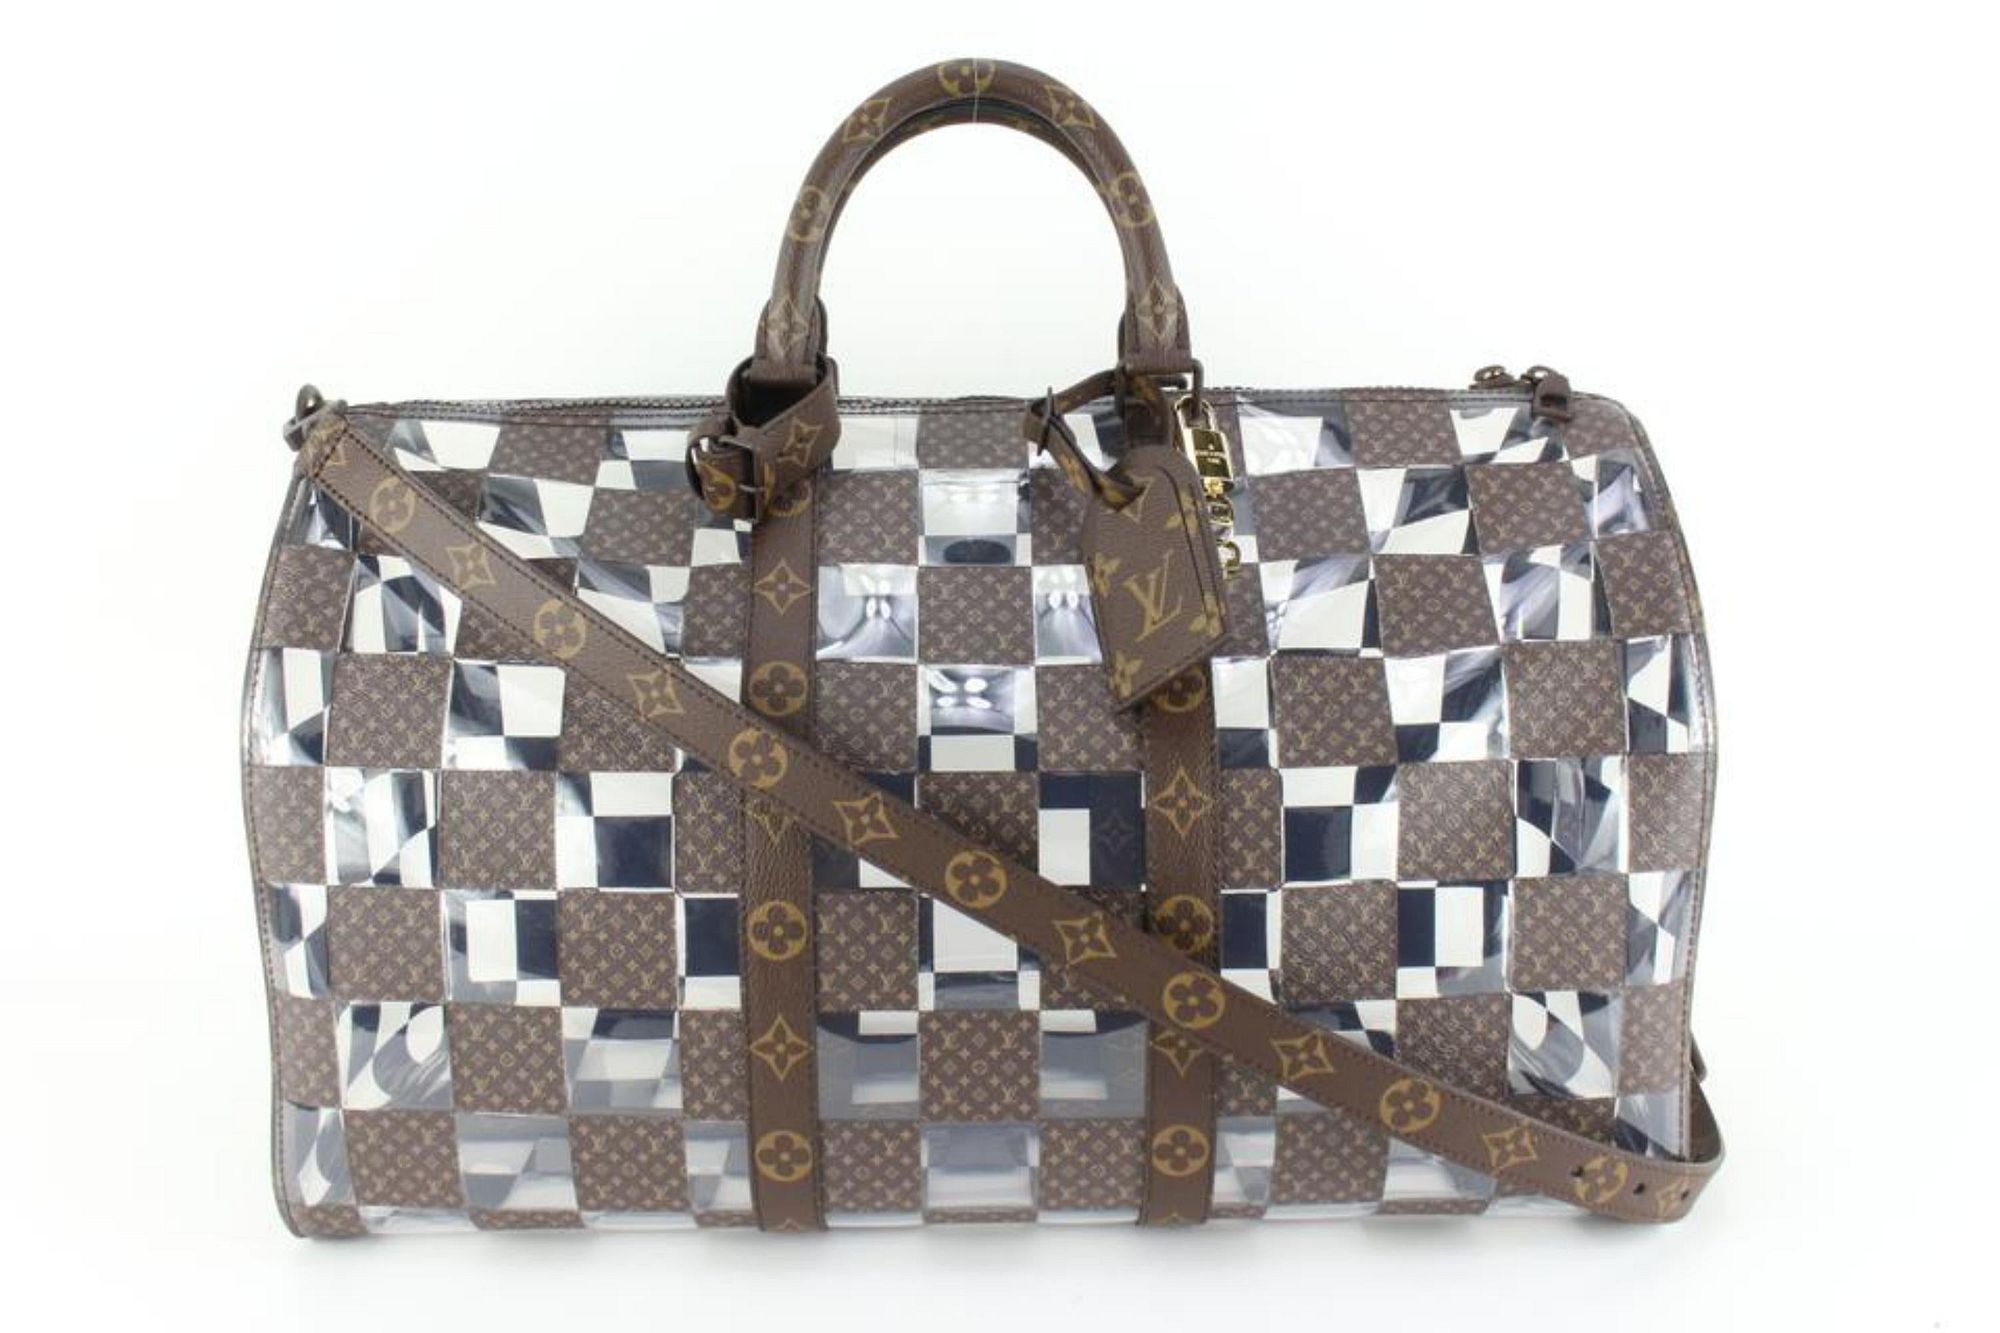 Sold at Auction: (2) LOUIS VUITTON 'KEEPALL' 50 & 55 DUFFLE BAGS